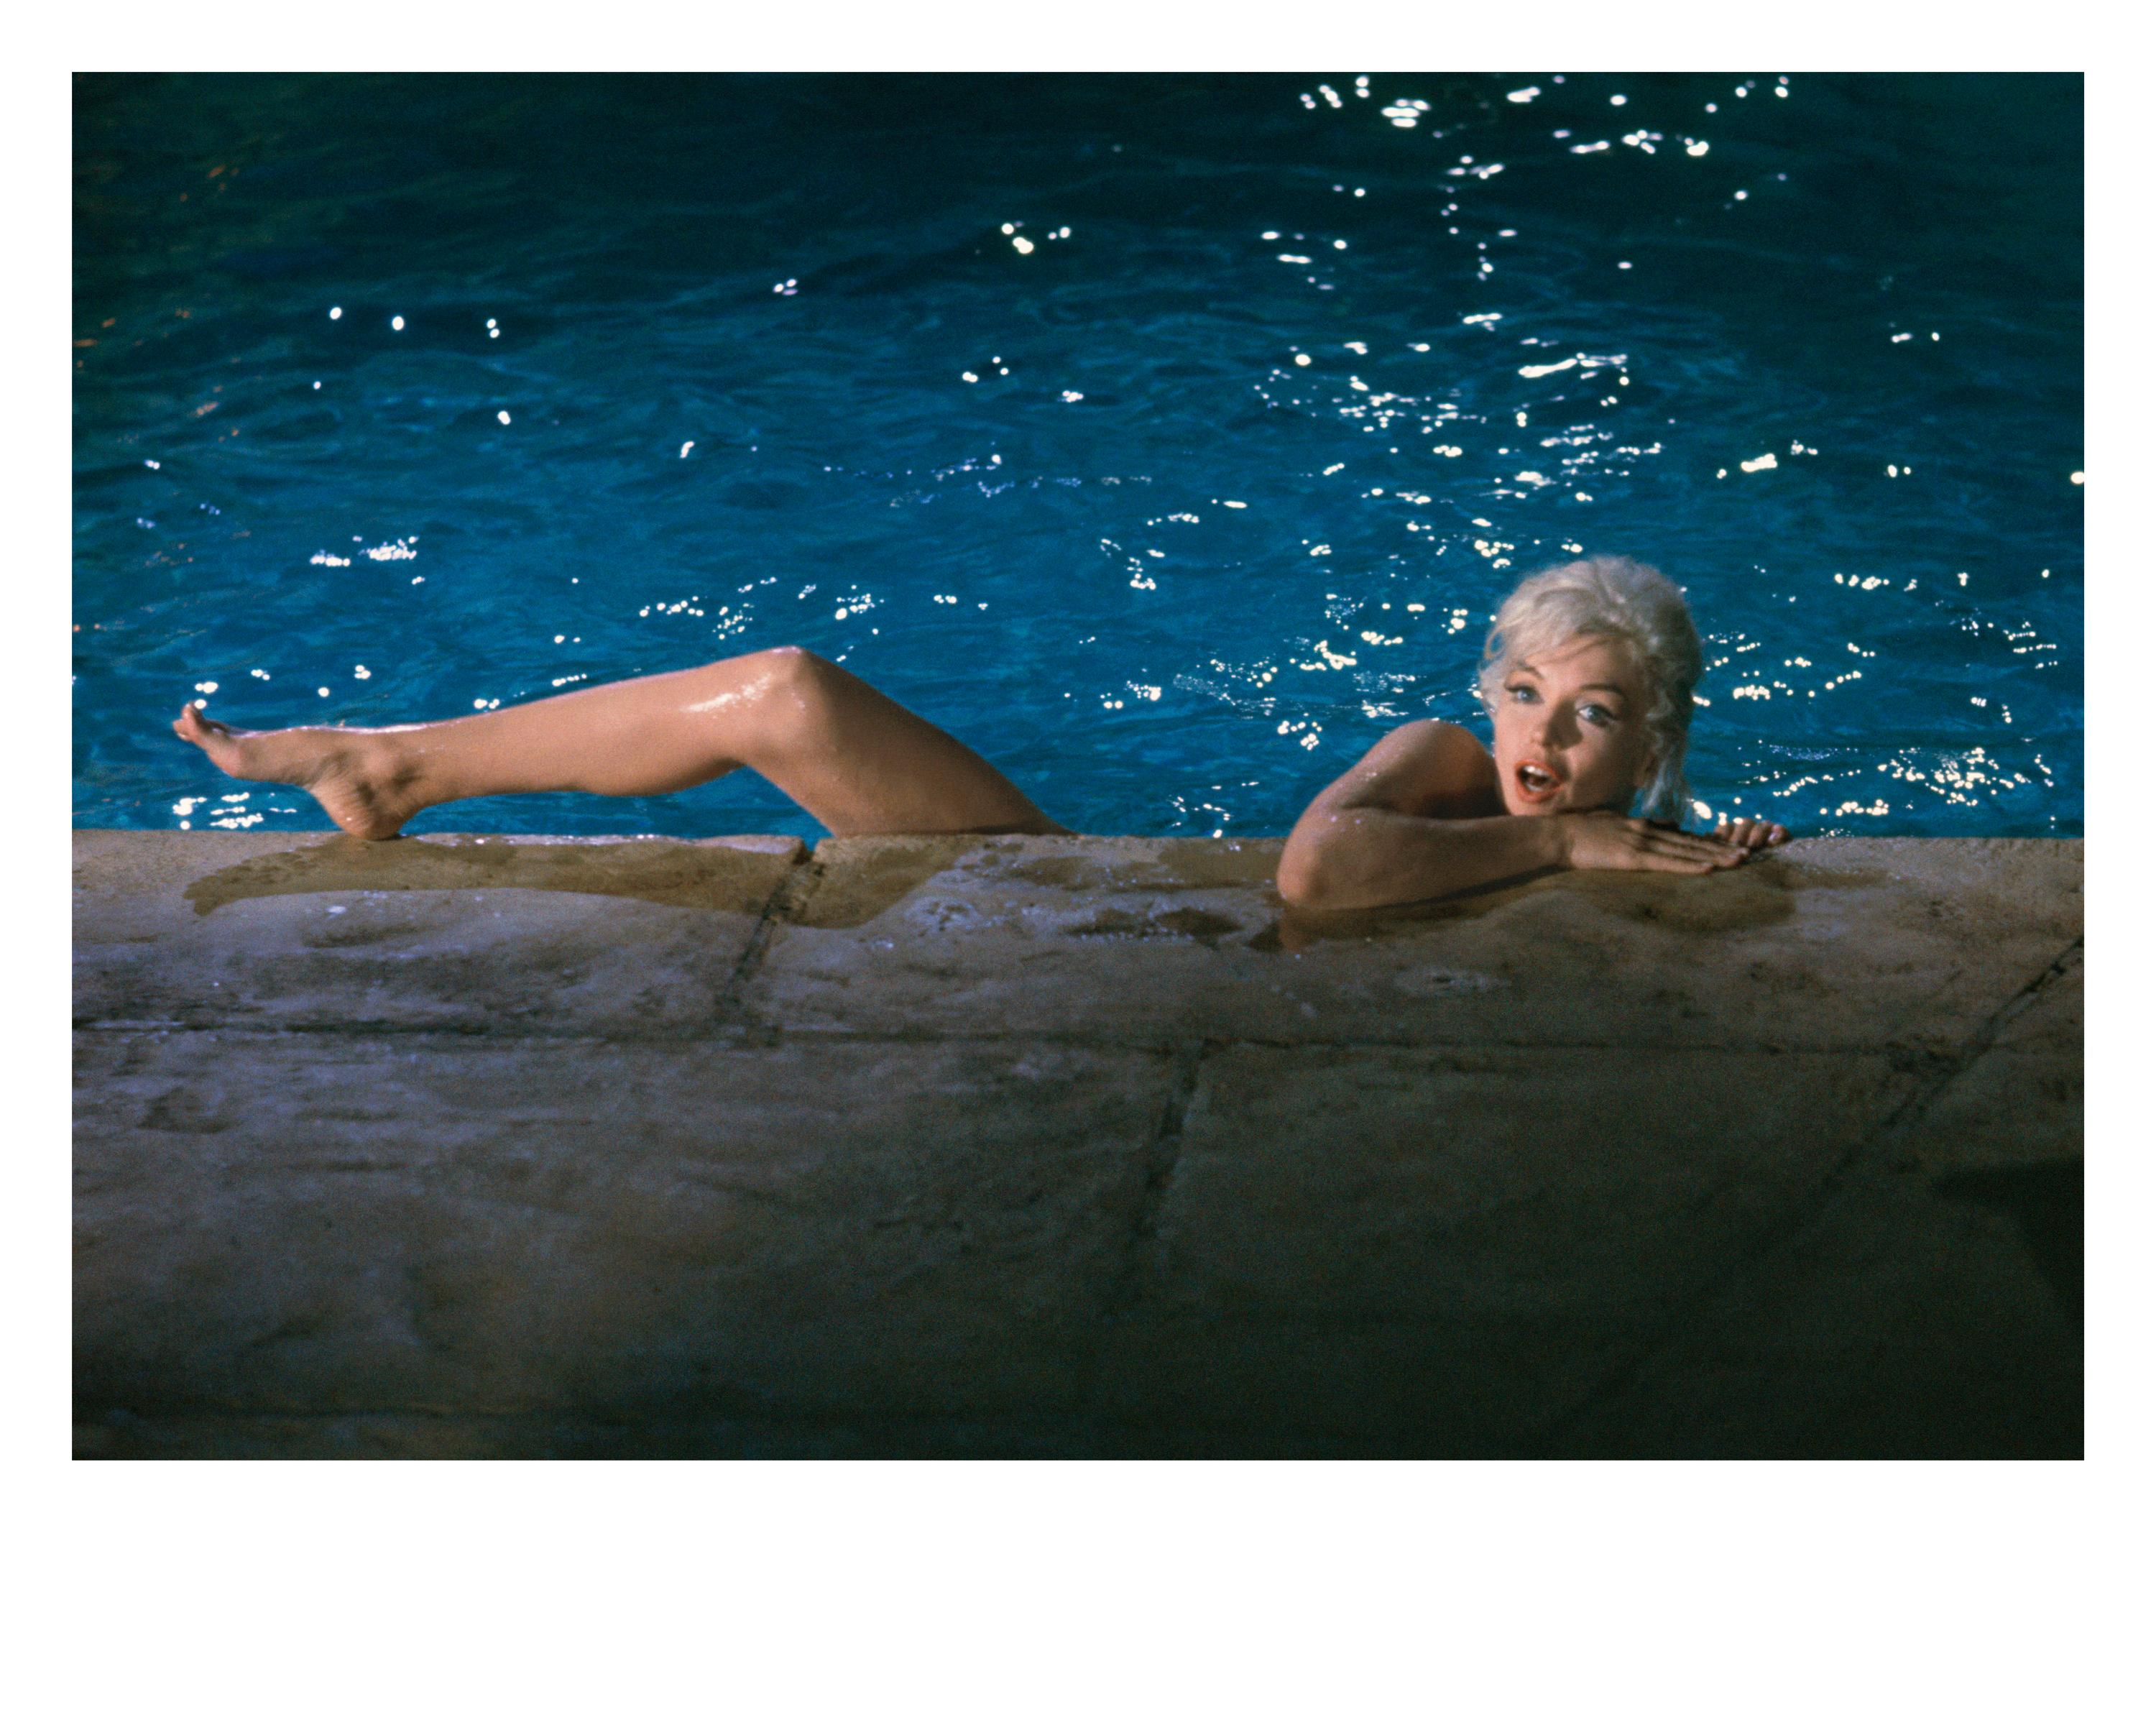 'Marilyn Monroe, 1962' by American photographer, Lawrence Schiller. Digital pigment, Ed. of 35. Image: 13 x 18.5 in. / Paper: 16 x 20 in. From the set of the film 'Something's Got to Give', this colored photograph features Marilyn Monroe in a pool